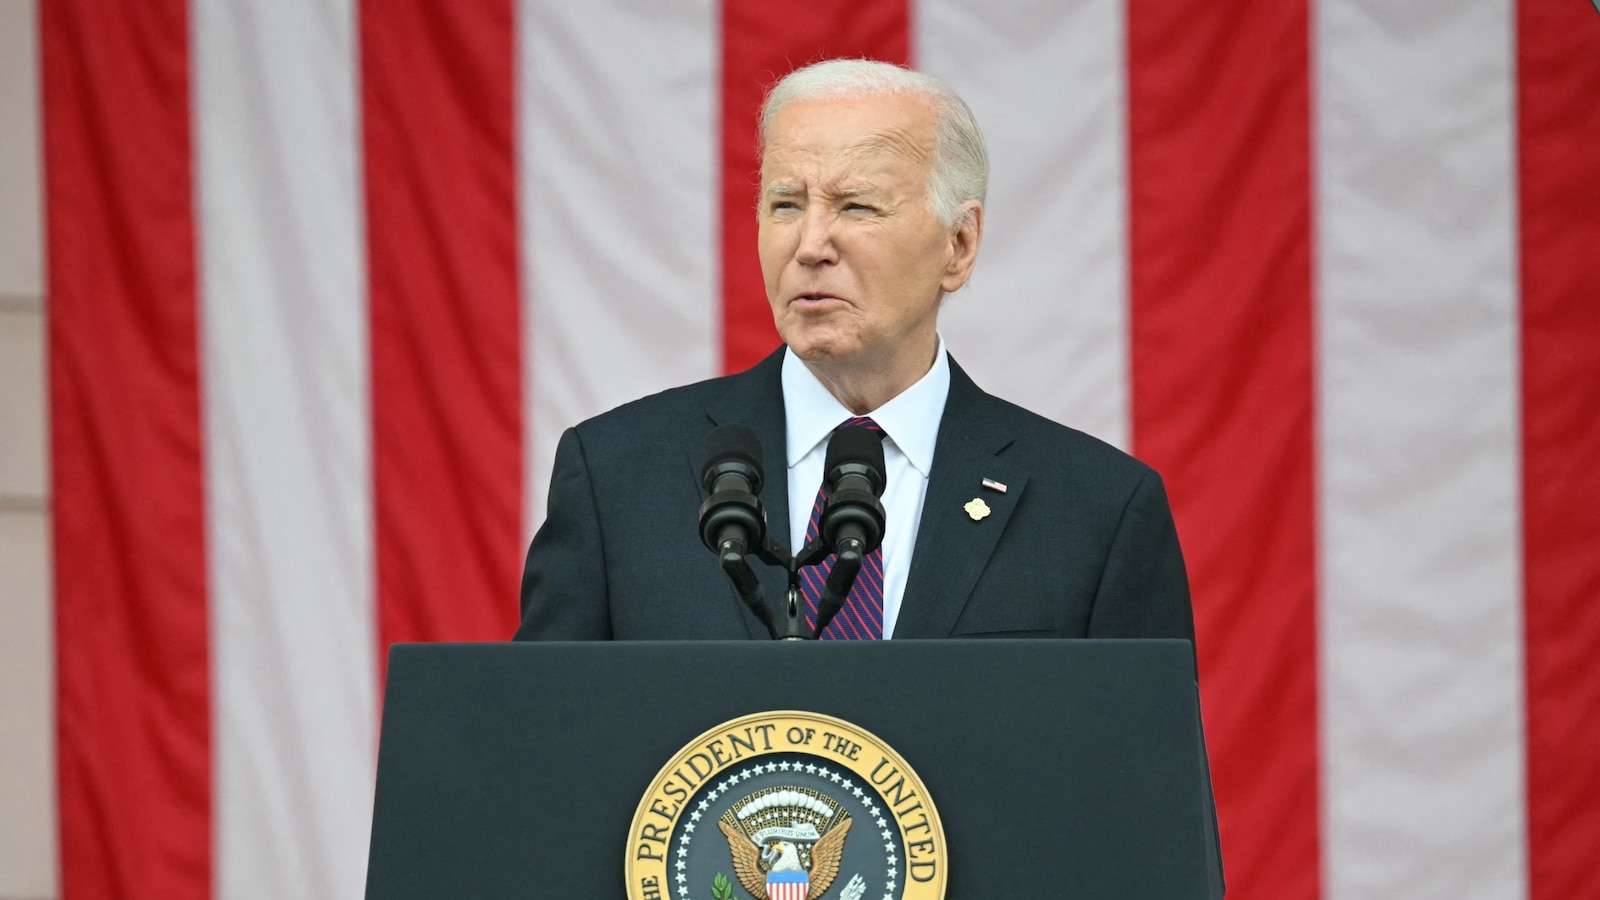 Biden, in Memorial Day speech, says Americans must continue upholding democracy [Video]